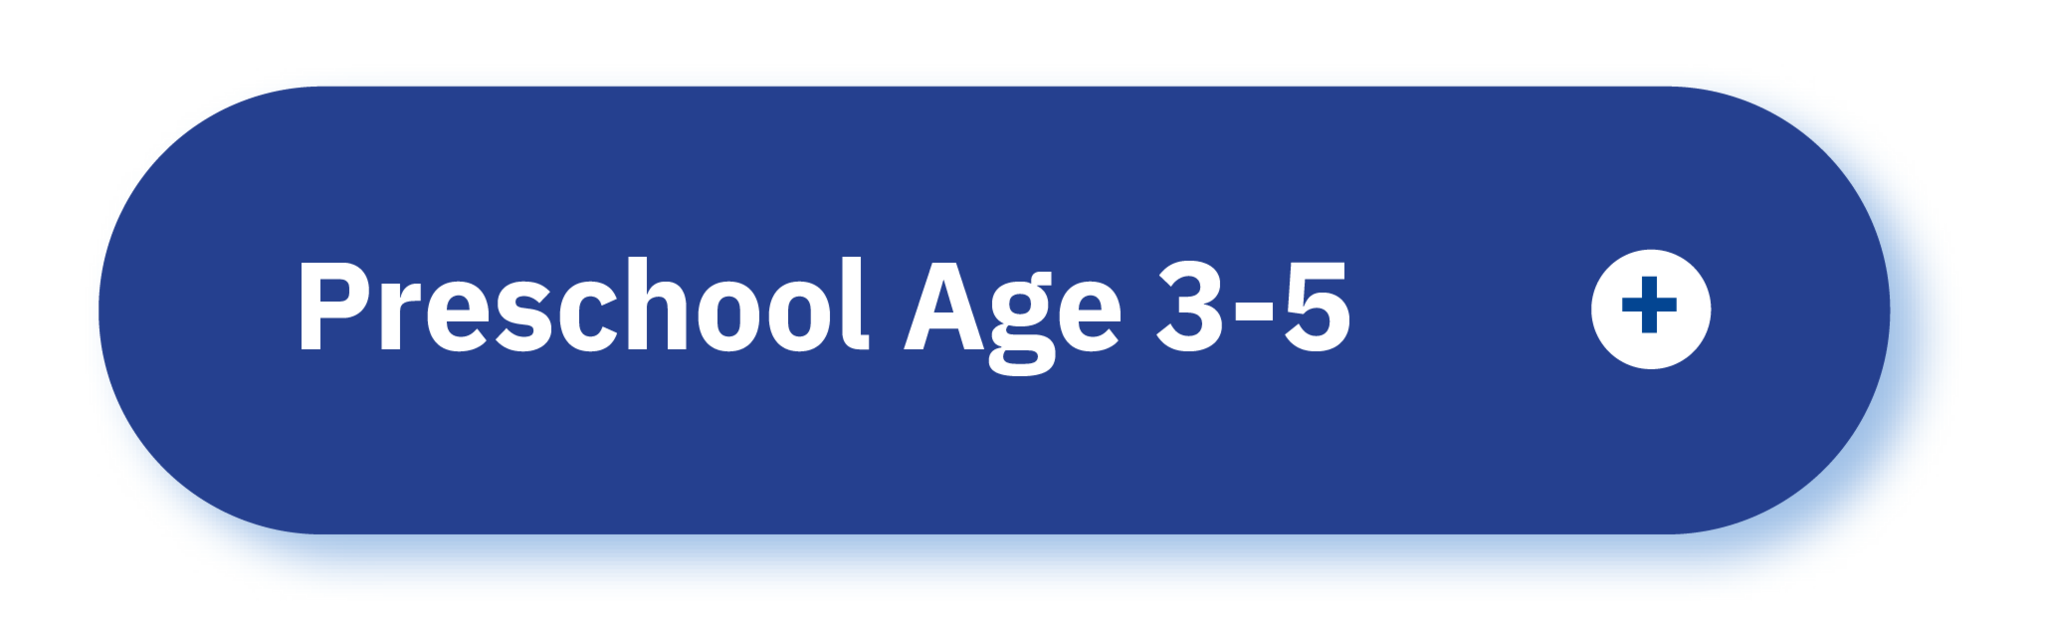 Click here for Preschool Age 3-5 services